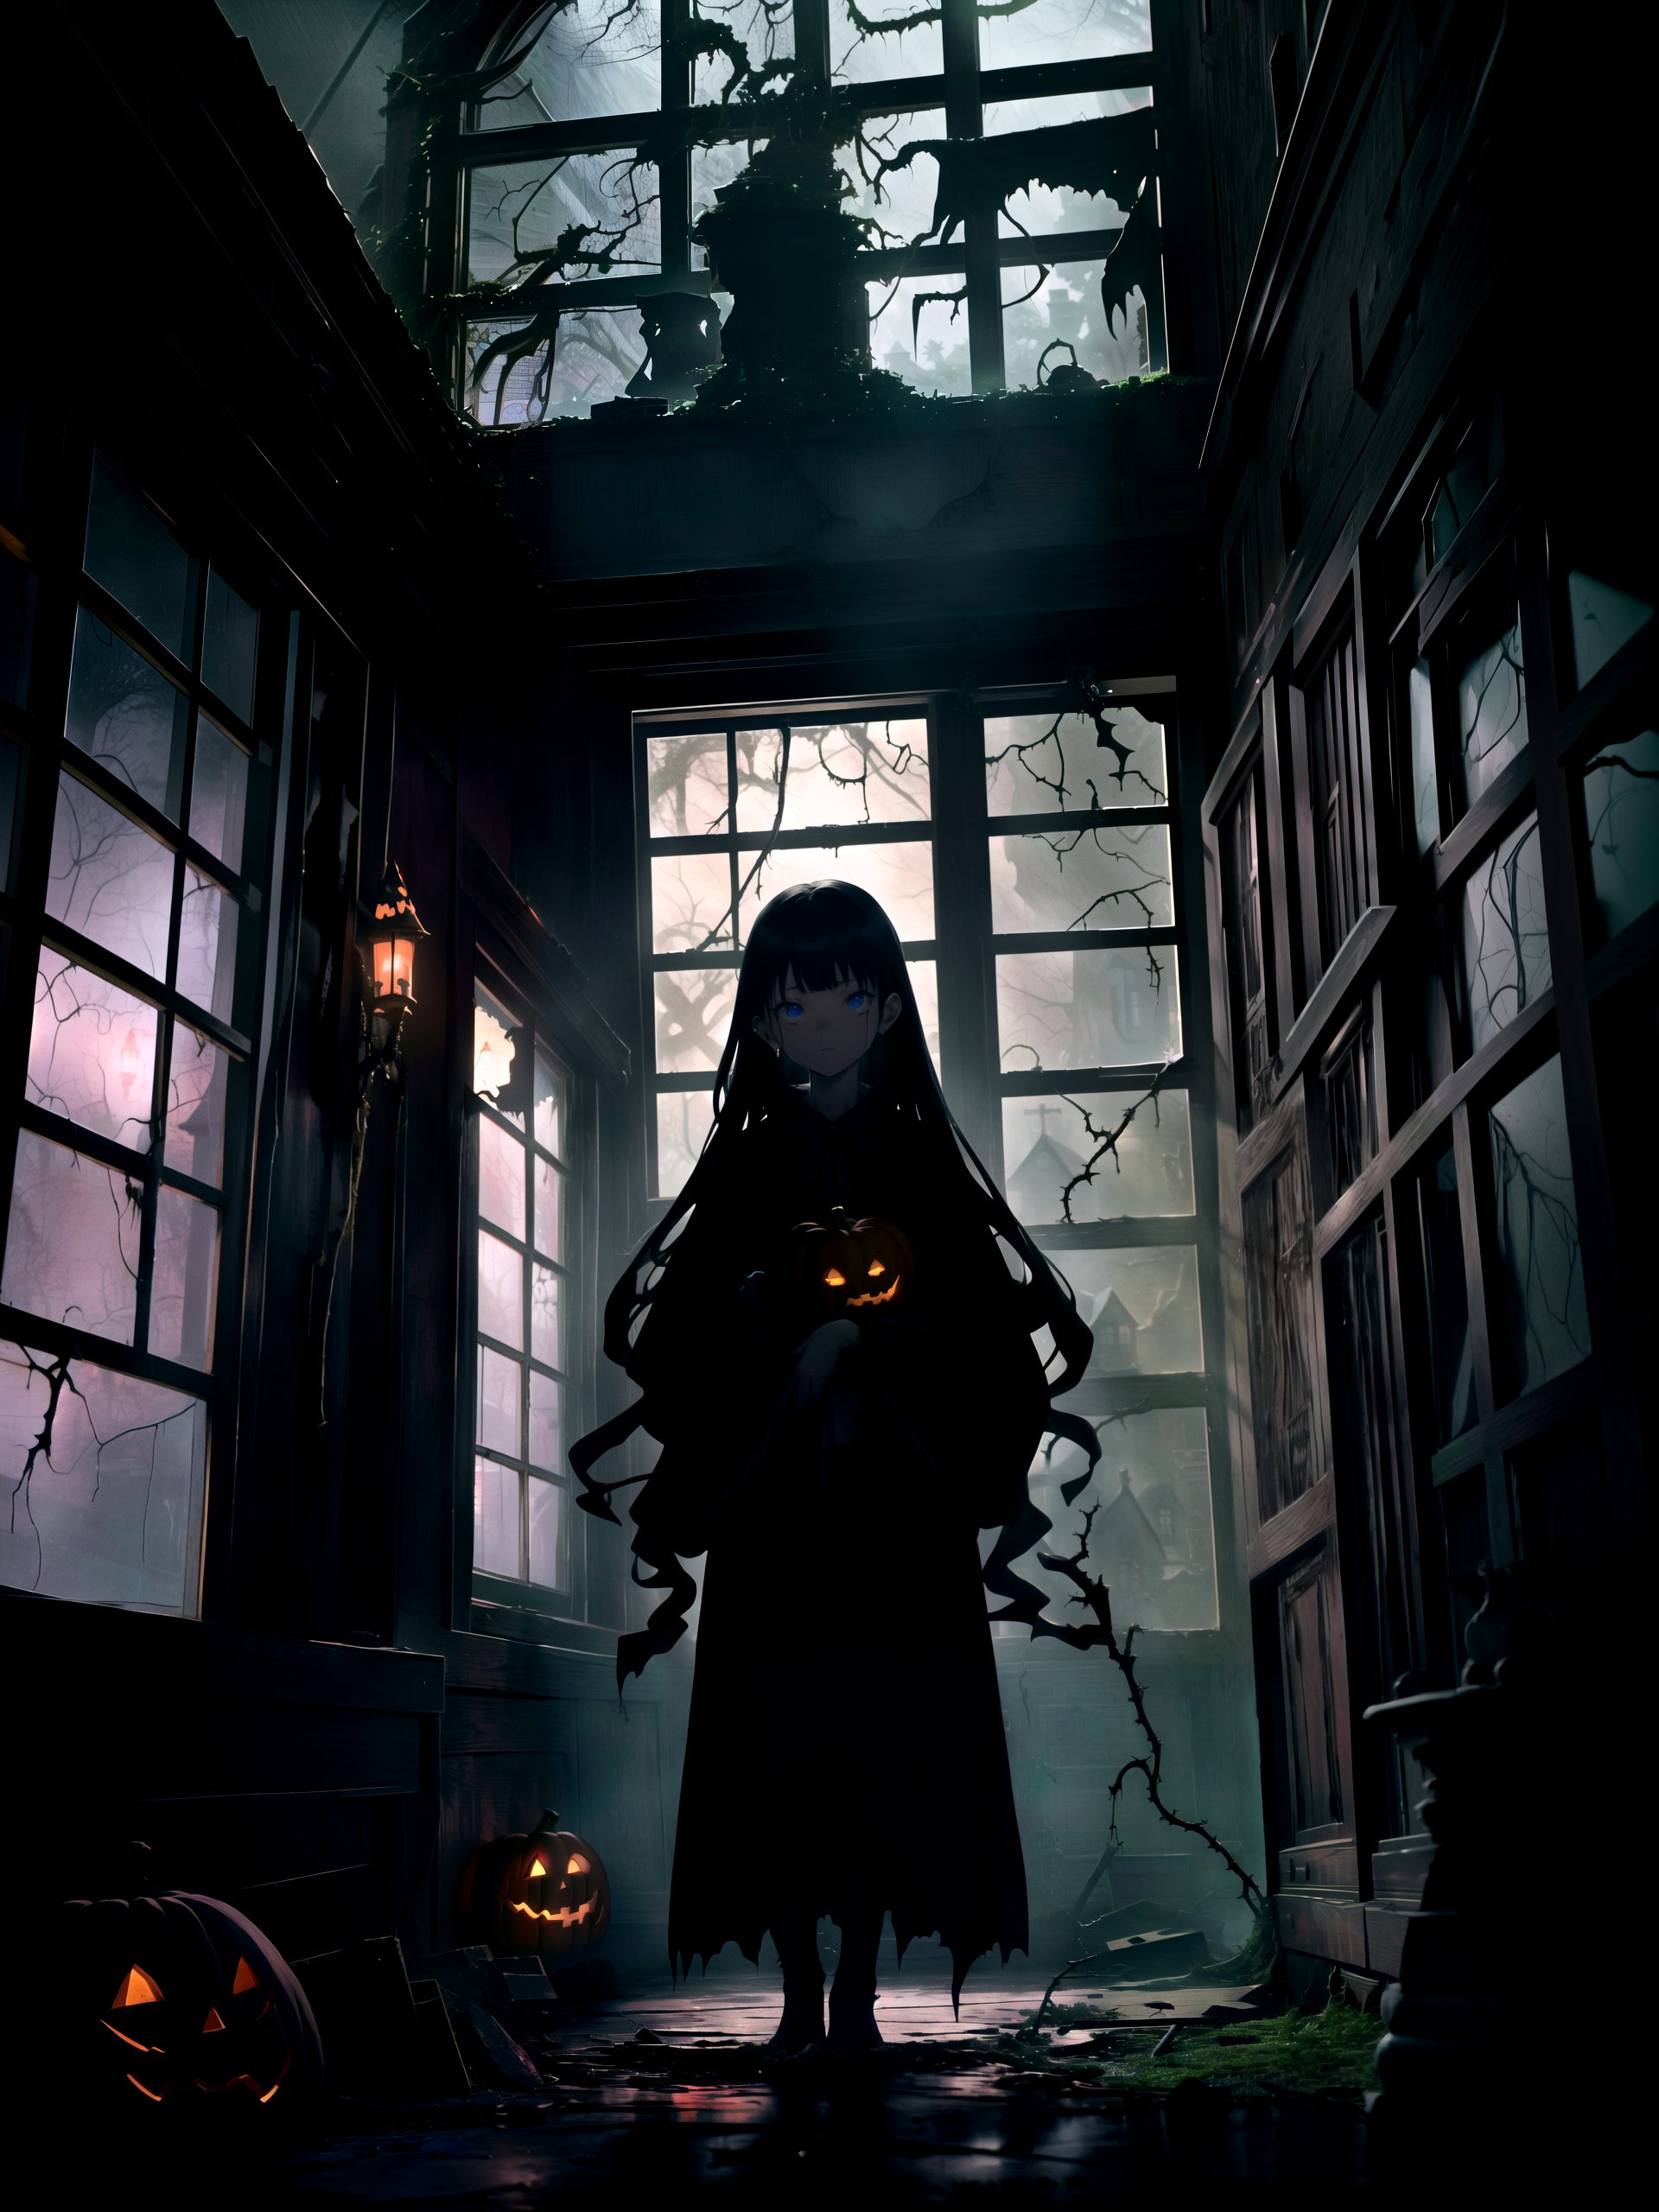 1girl, anime, a girl in a Halloween costume, standing in front of a haunting house adorned with eerie decorations. The girl's costume is inspired by the mystical and macabre, with dark colors, flowing fabric, and intricate details. She holds a carved pumpkin, its flickering candle casting an eerie glow on her face. The haunting house behind her is dilapidated, with broken windows and overgrown vines, creating a spooky atmosphere. Shot with a Sony A7 III, Fujifilm Velvia 50 film, 35mm lens, capturing the haunting beauty of the scene with rich colors and sharp details.